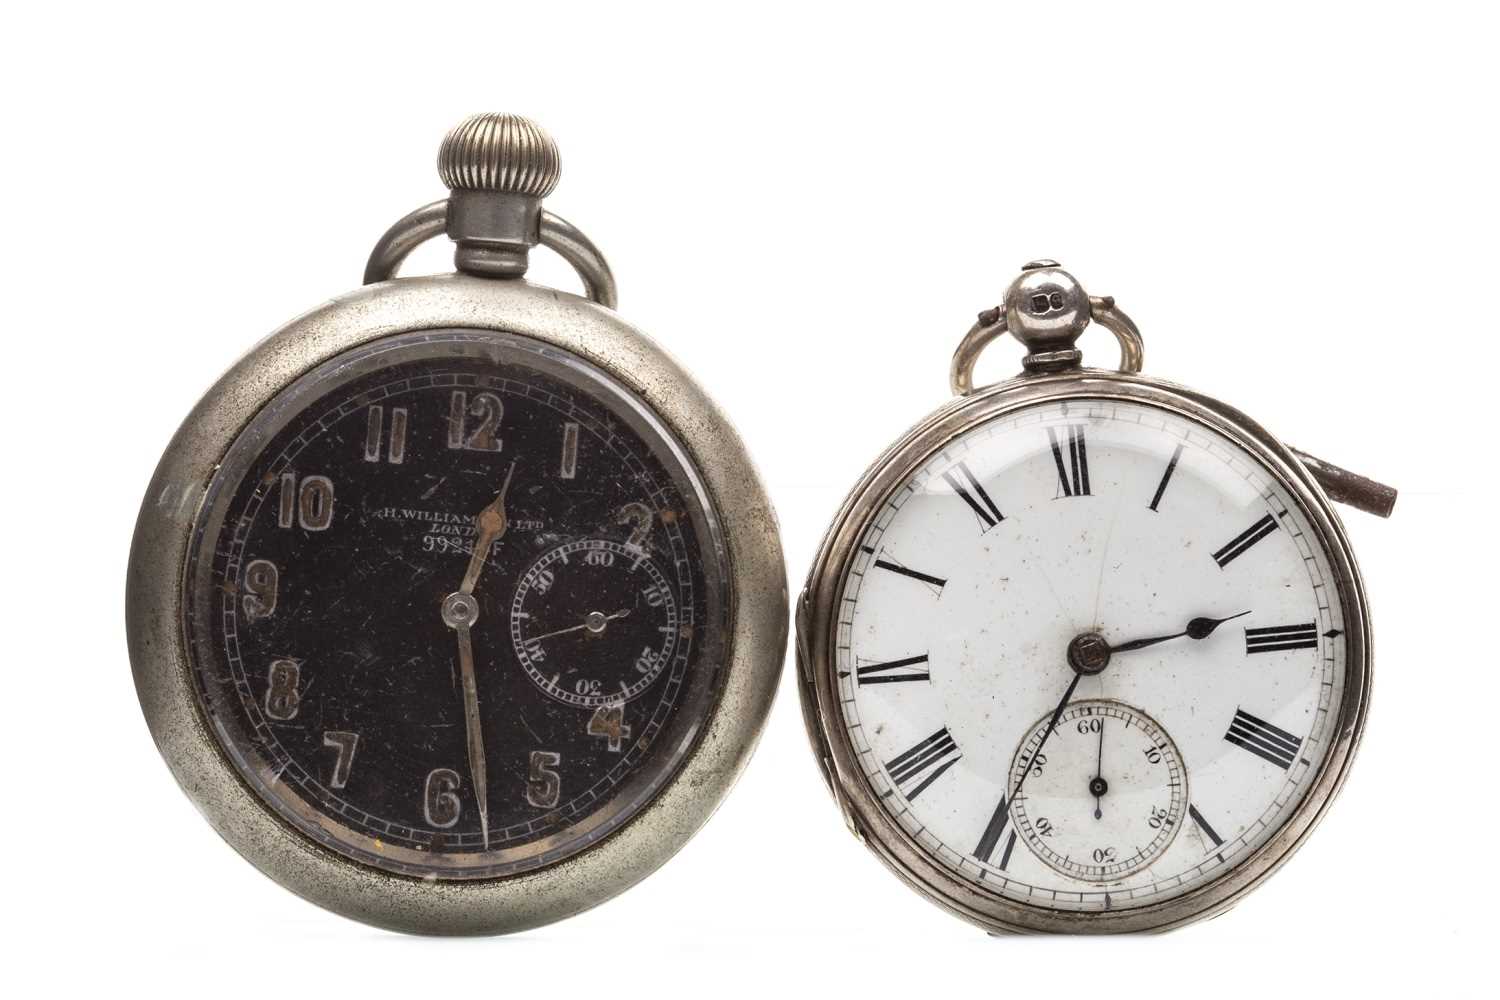 Lot 782 - A MILITARY POCKET WATCH AND A POCKET WATCH